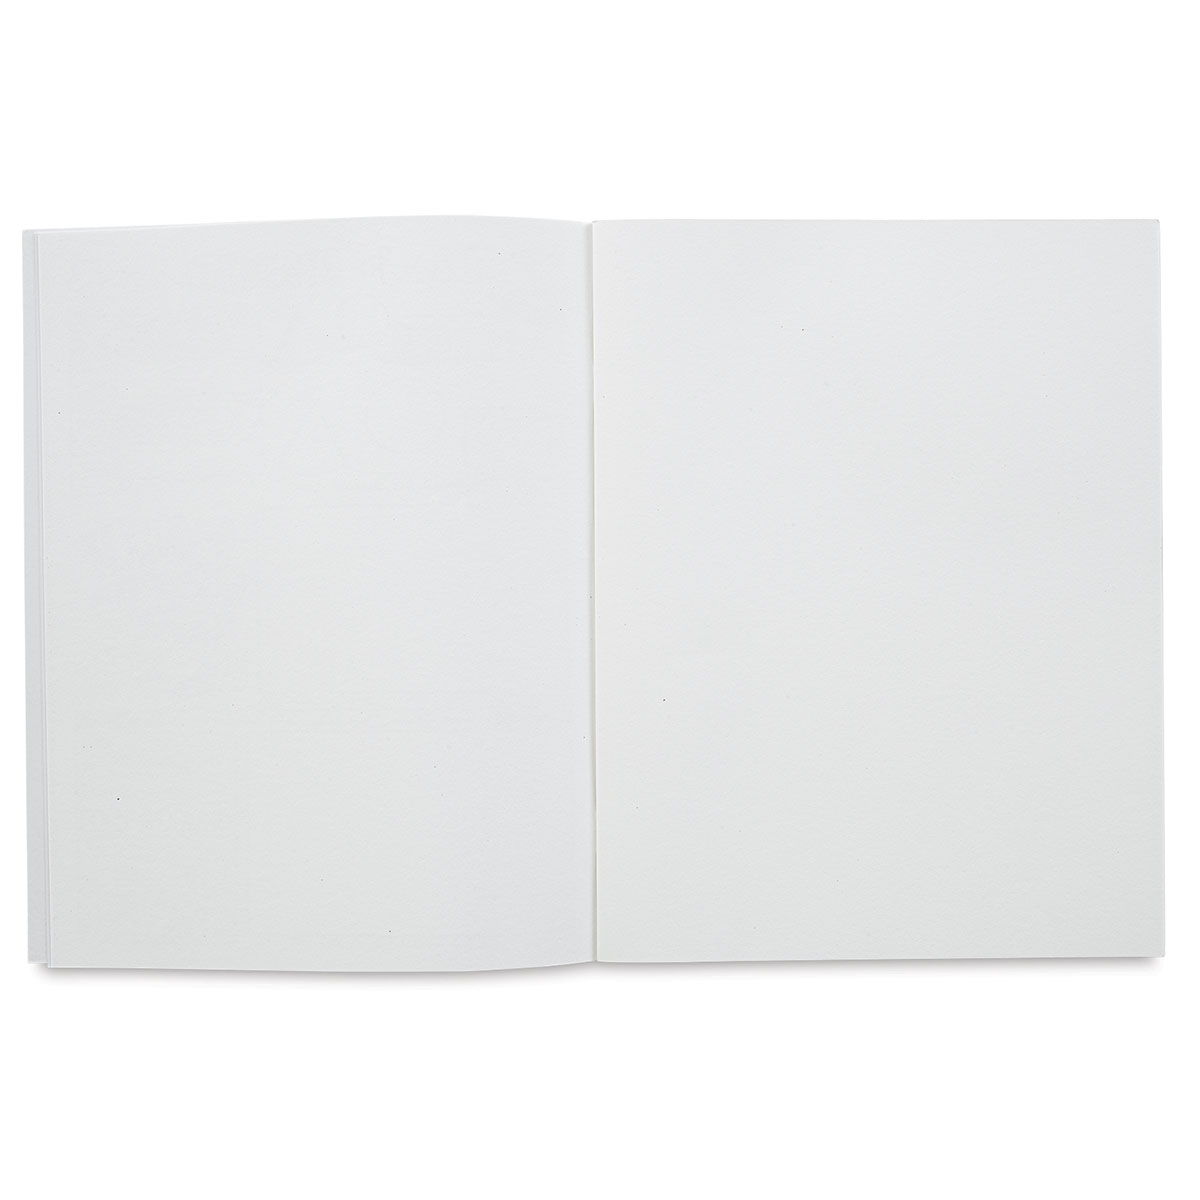 Prang Sketch Smart Sketch Book, White, 11 x 8-1/2 Inches, 40 Sheets